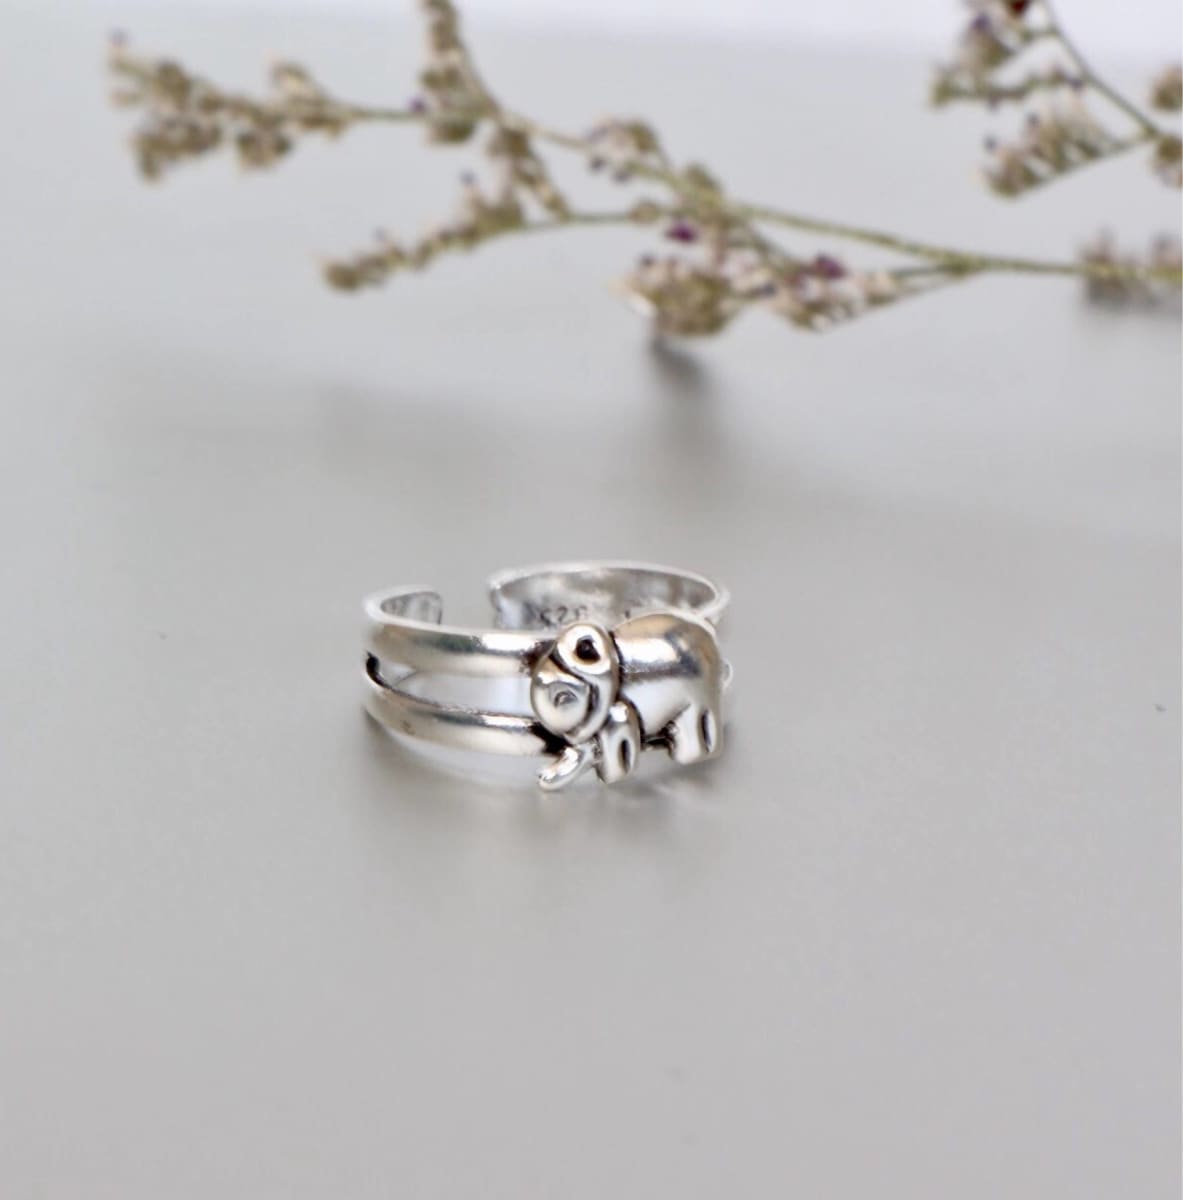 Dazzle Me Designs — Sterling Silver Toe rings or Childrens Rings- Page 2.  (with varying prices)